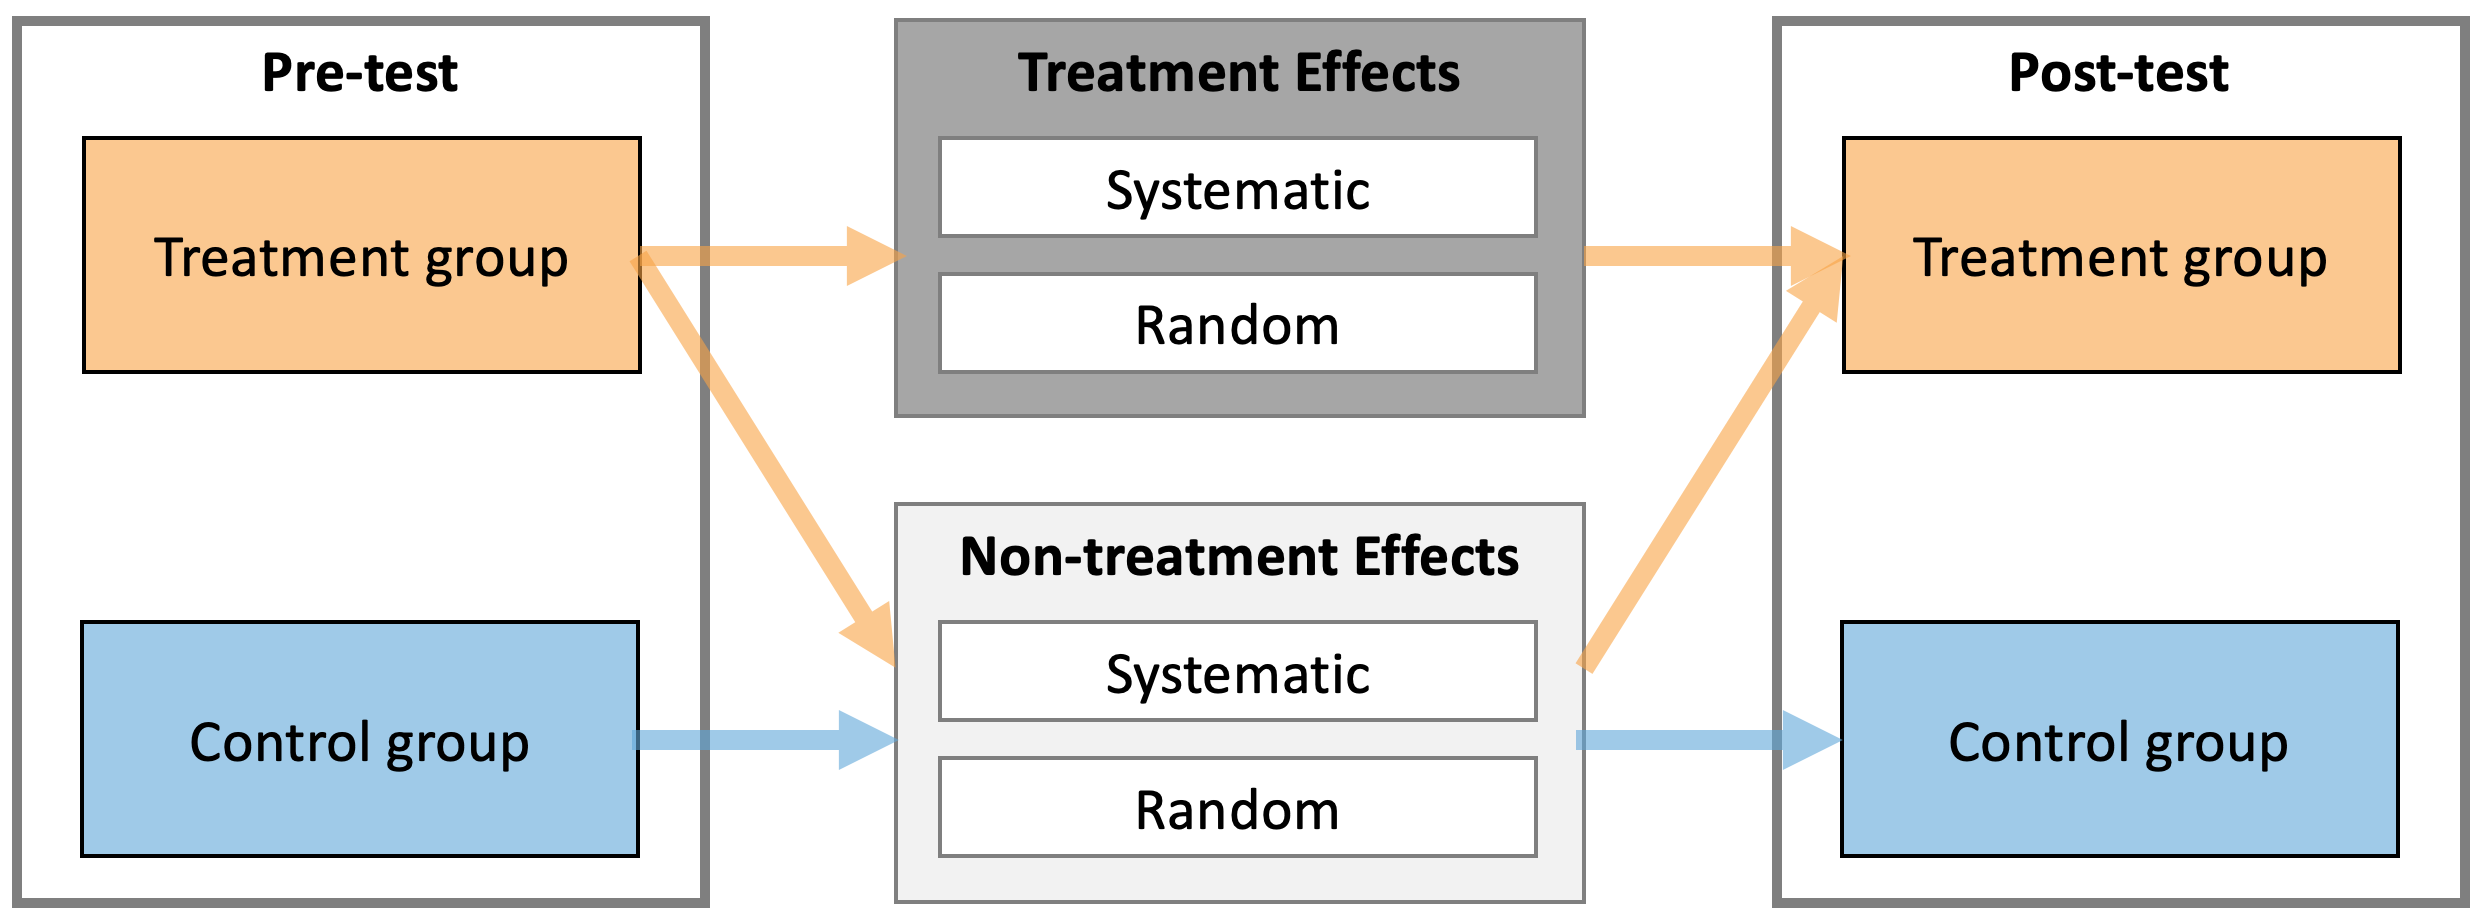 Treatment and Non-treatment effects of intervention. Both treatment and non-treatment effects consists of two components: systematic and random. Treatment group experiences both treatment and non-treatment effects, while Control group experiences only non-treatment effects.